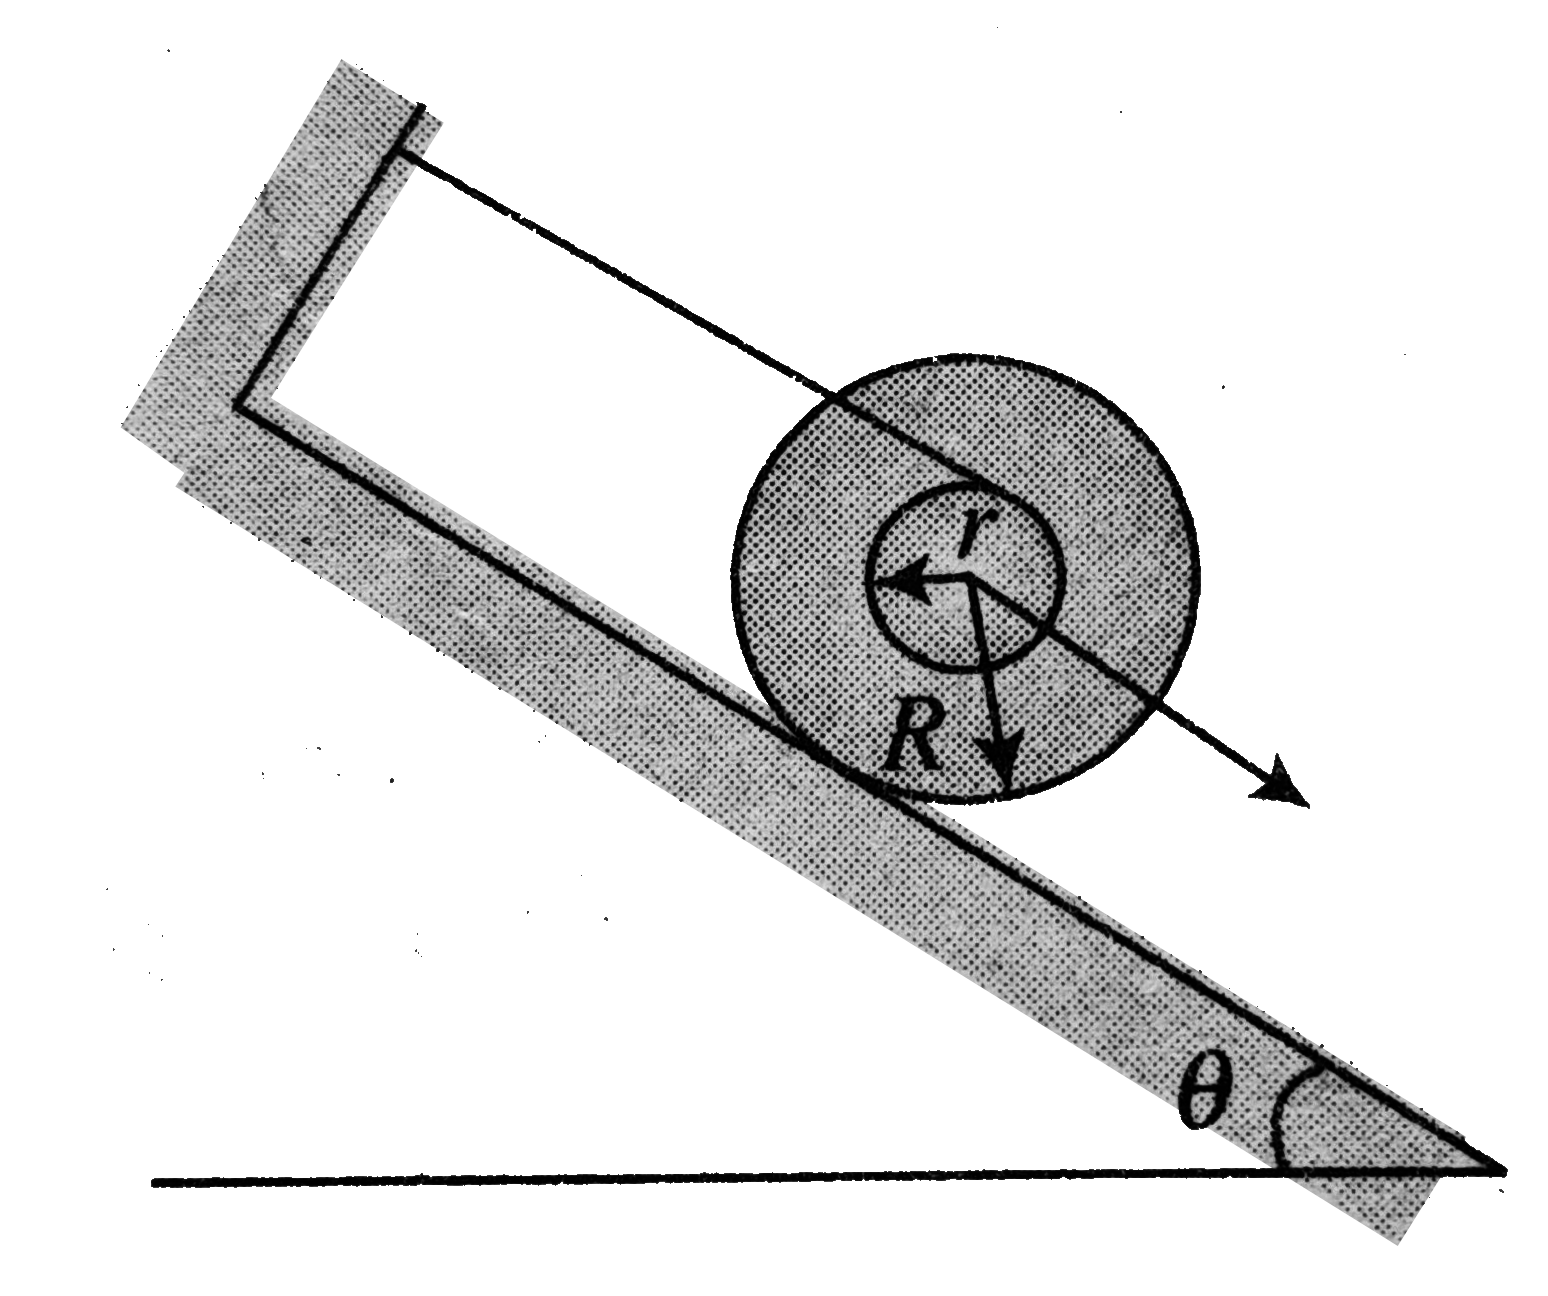 Figure shows a spool with thread wound on it placed on a smooth plane inclined at angle from horizontal. The spool has mass m, edge radius R, and is wound up to a radius r. its moment of inertia about its own axis is I. The free end of the thread is attached as shown in the figure. So that the thread is parallel to the inclined plane. T is the tension in the thread. Which of the following is correct?